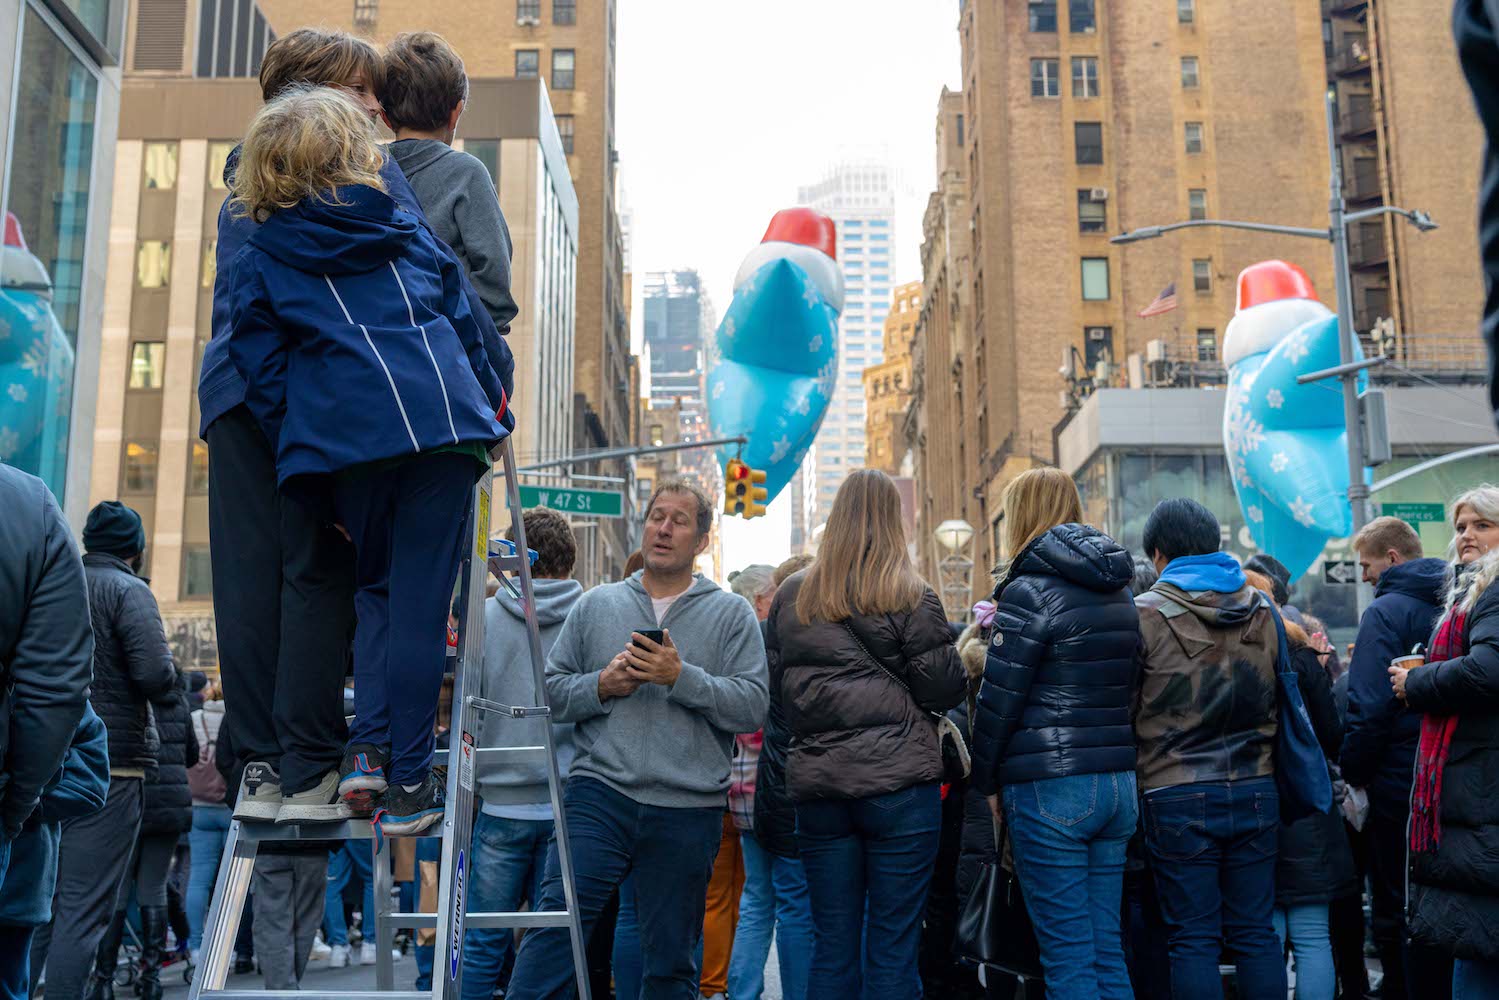 Three kids stand atop a silver ladder to watch the parade behind a line of adults.